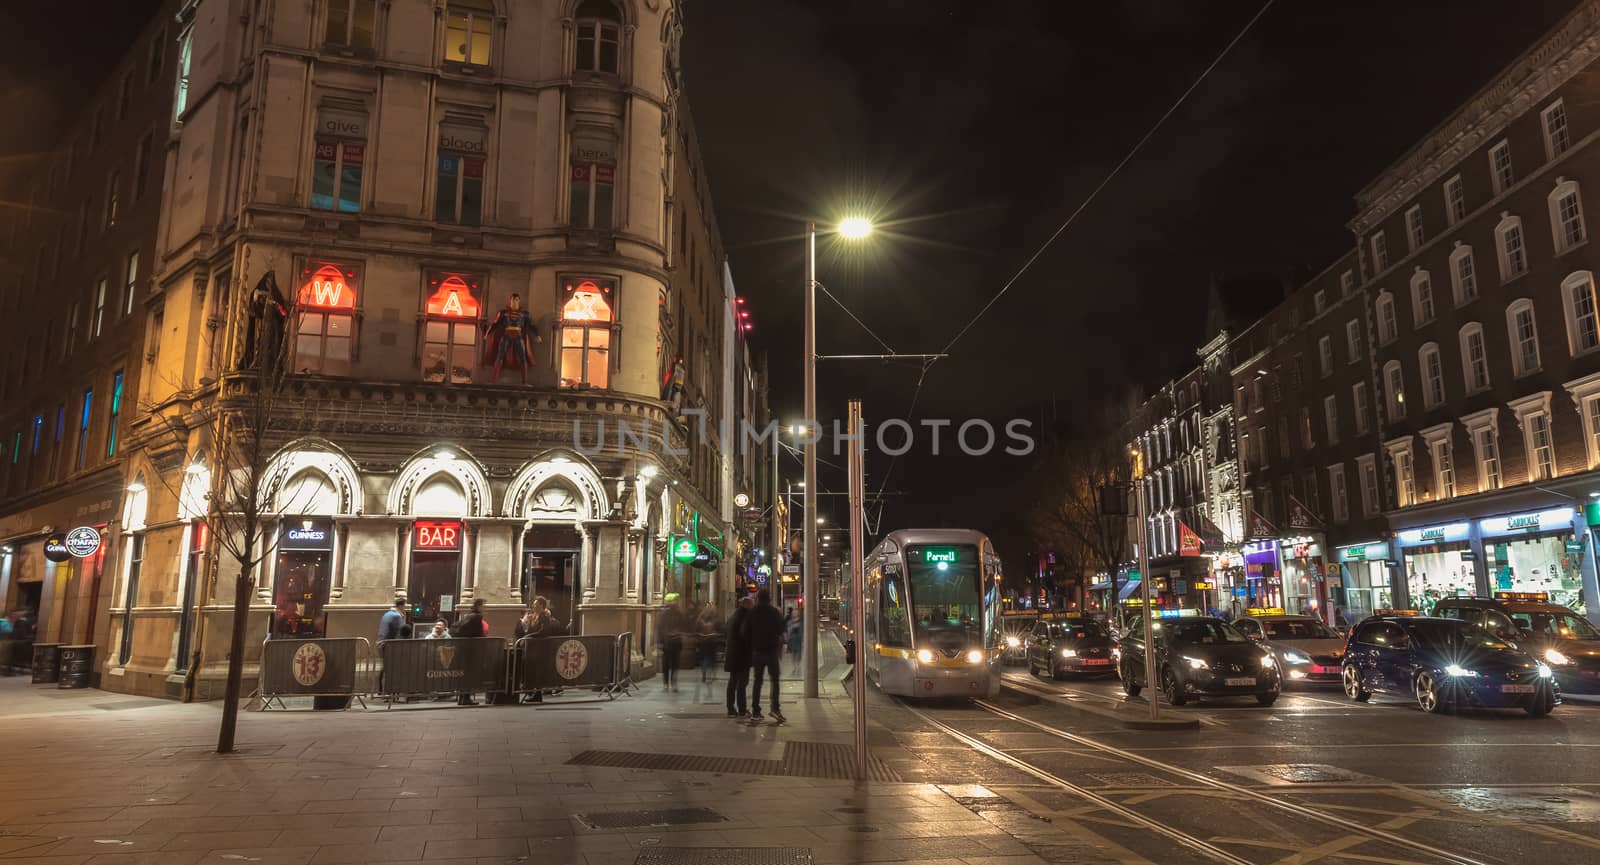 Dublin, Ireland - February 15, 2019: Architecture detail at night of the Wax Museum in the city center where people walk one evening